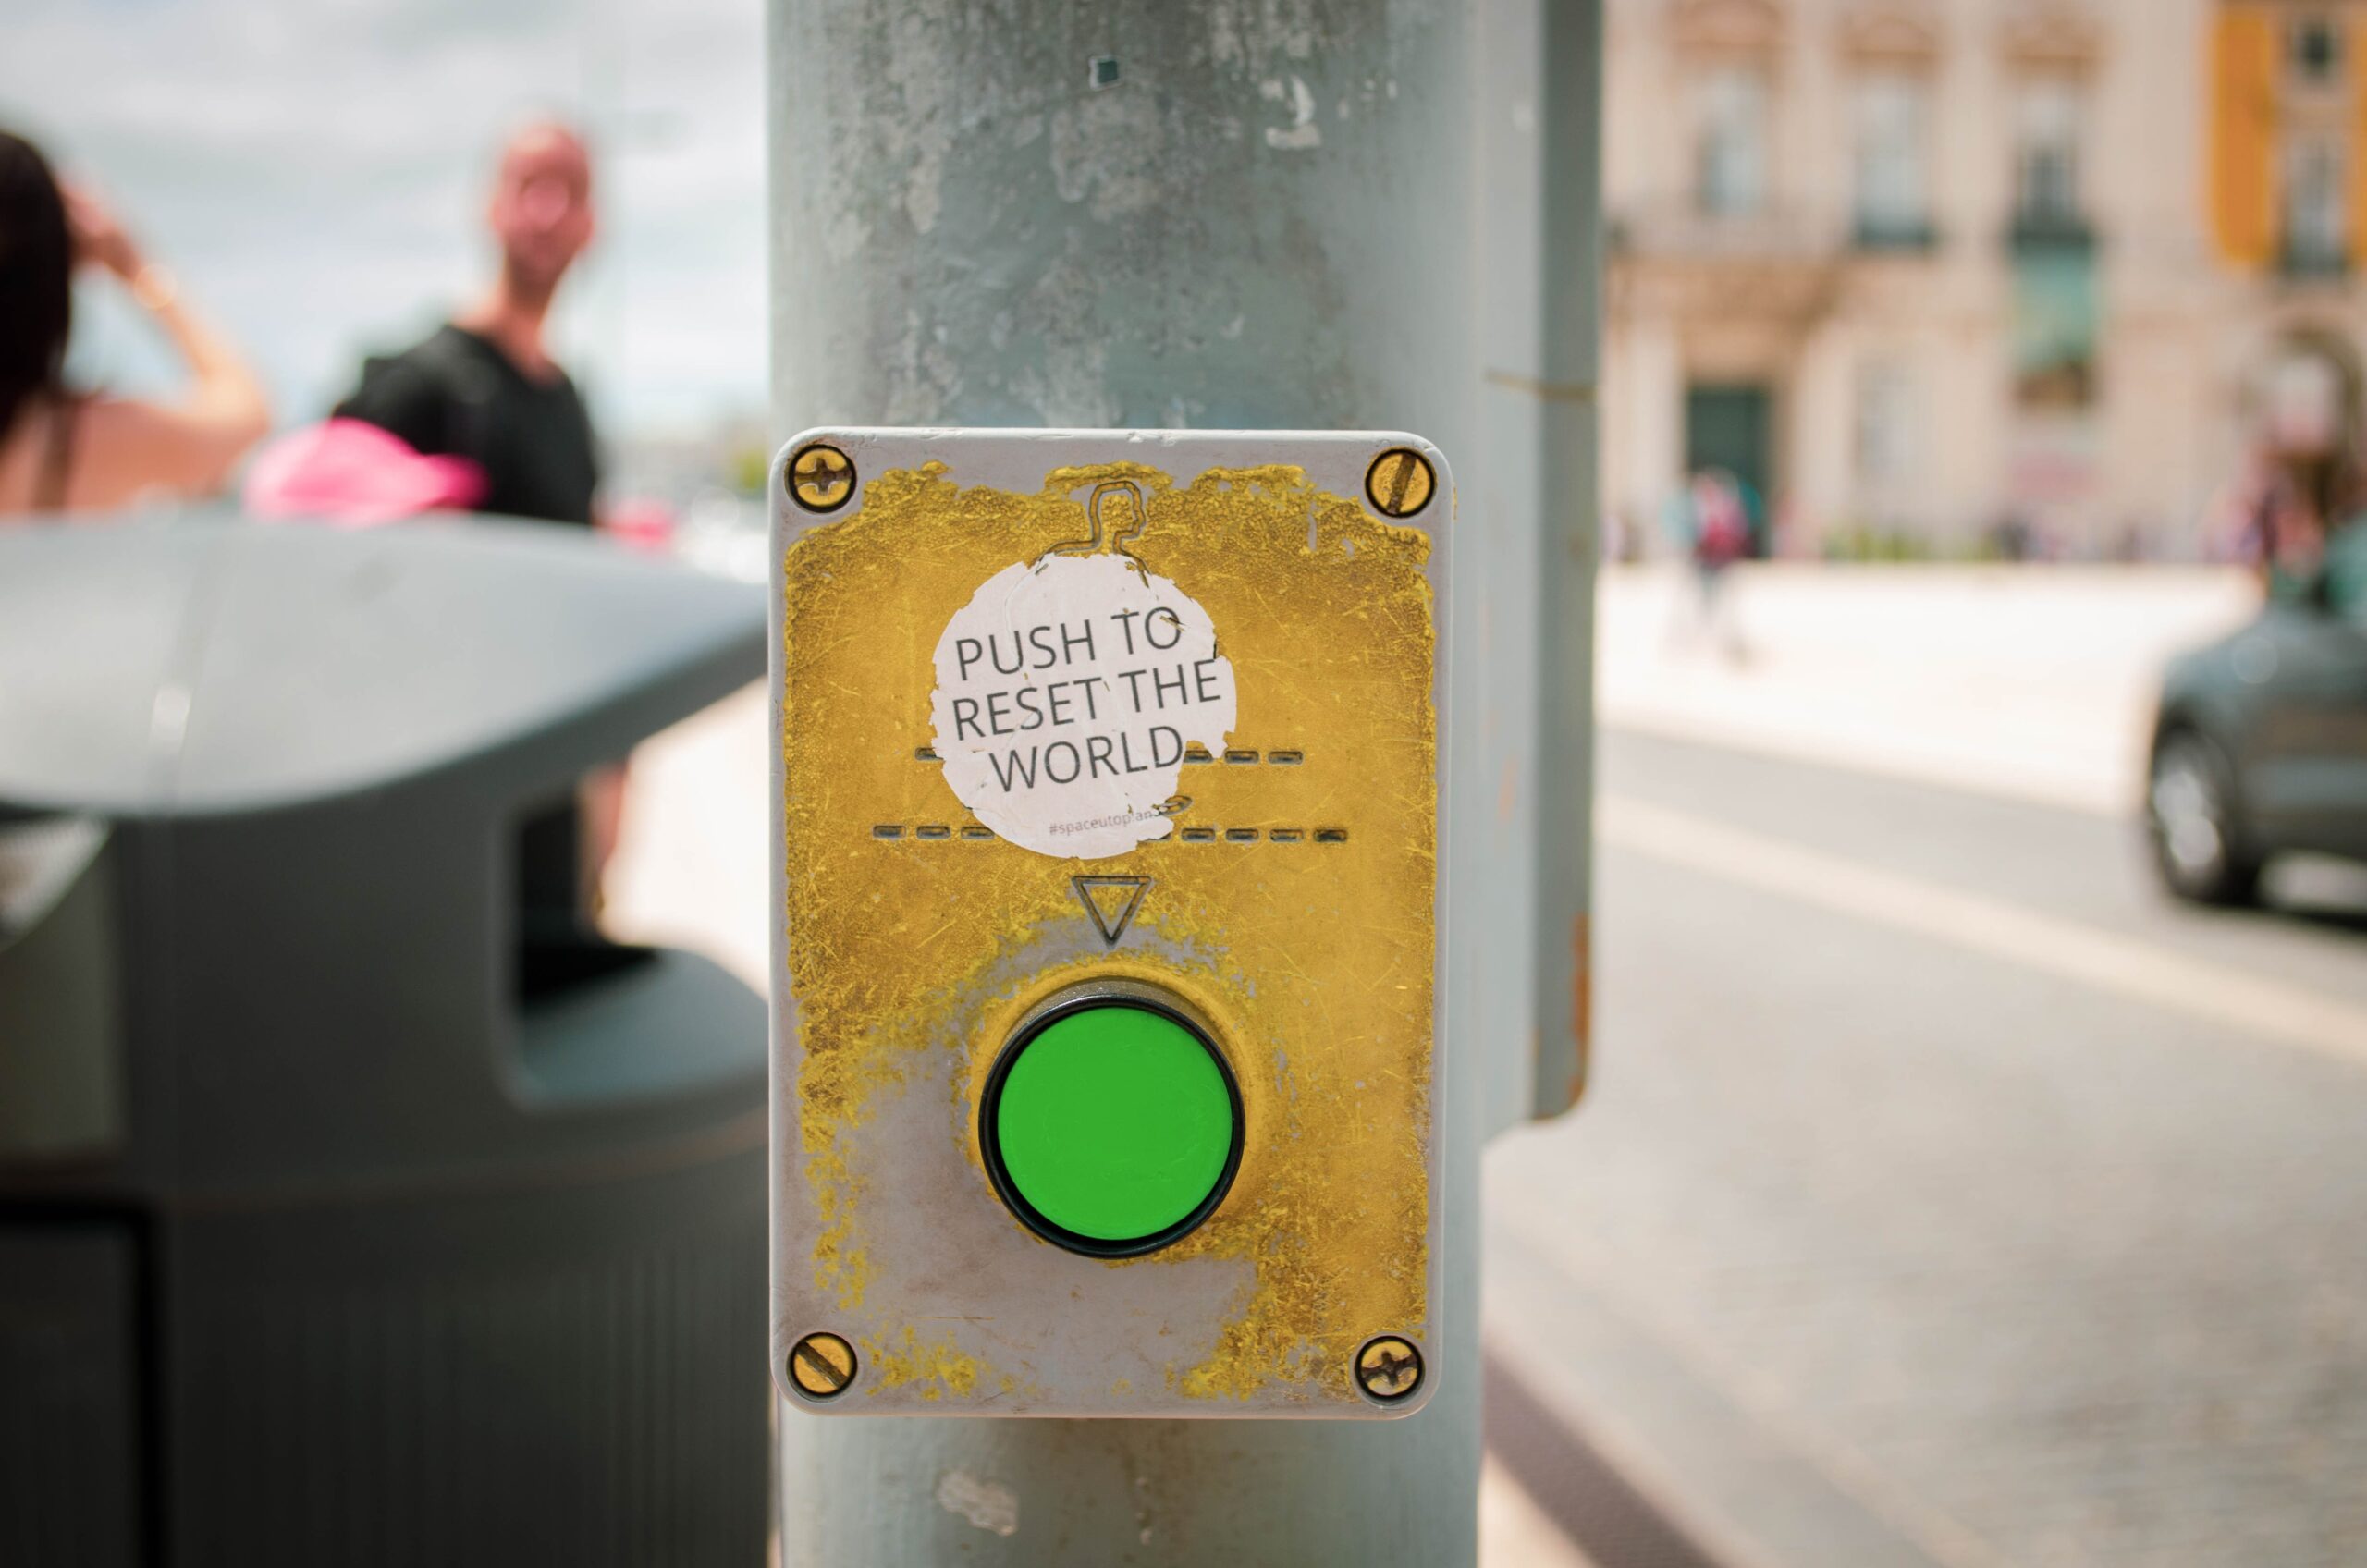 A green button on a pole that says, "push to reset the world".